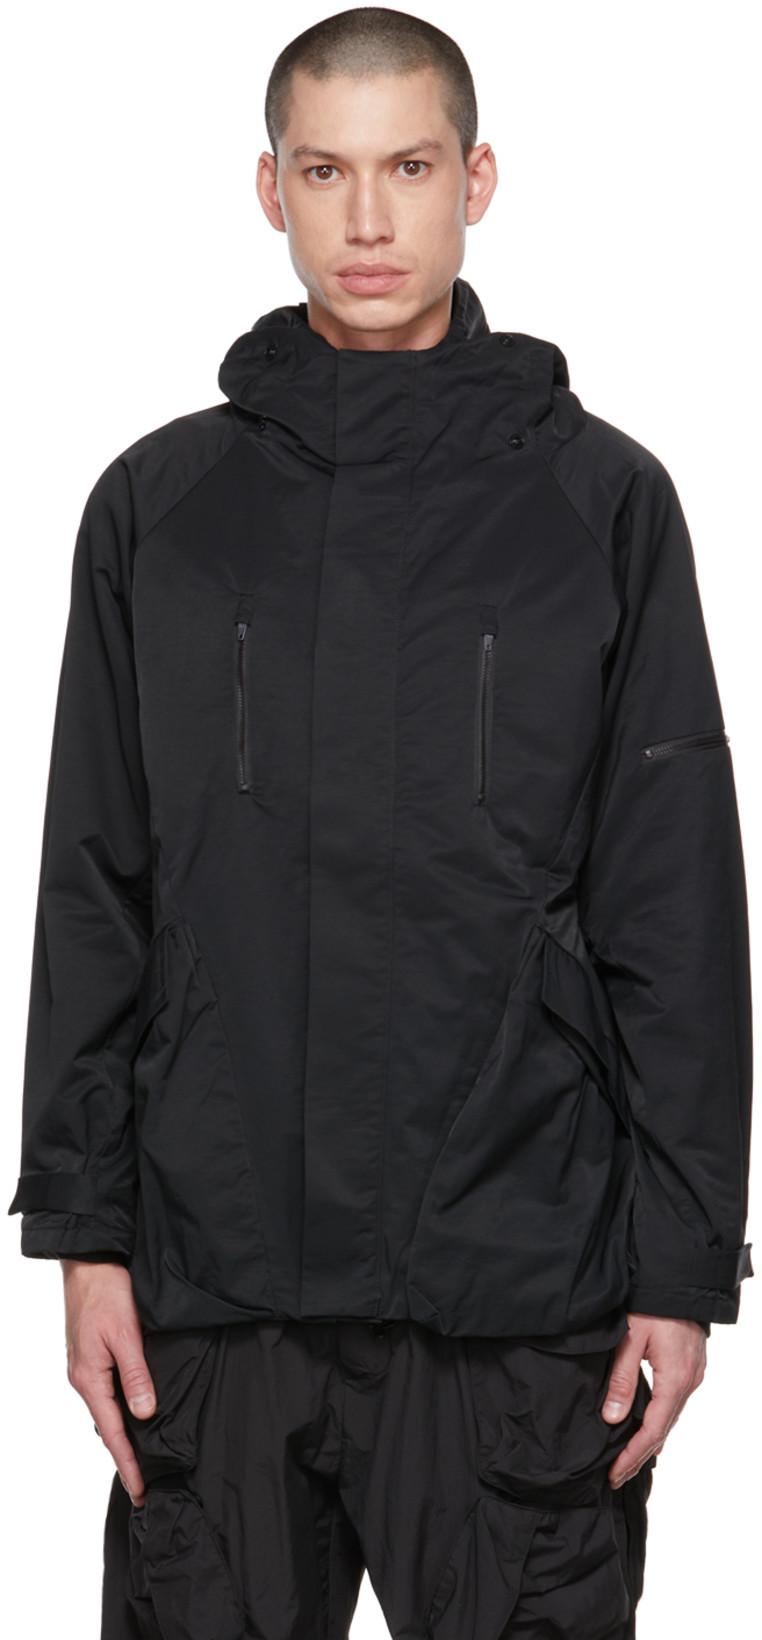 Black Paneled Jacket by ARCHIVAL REINVENT